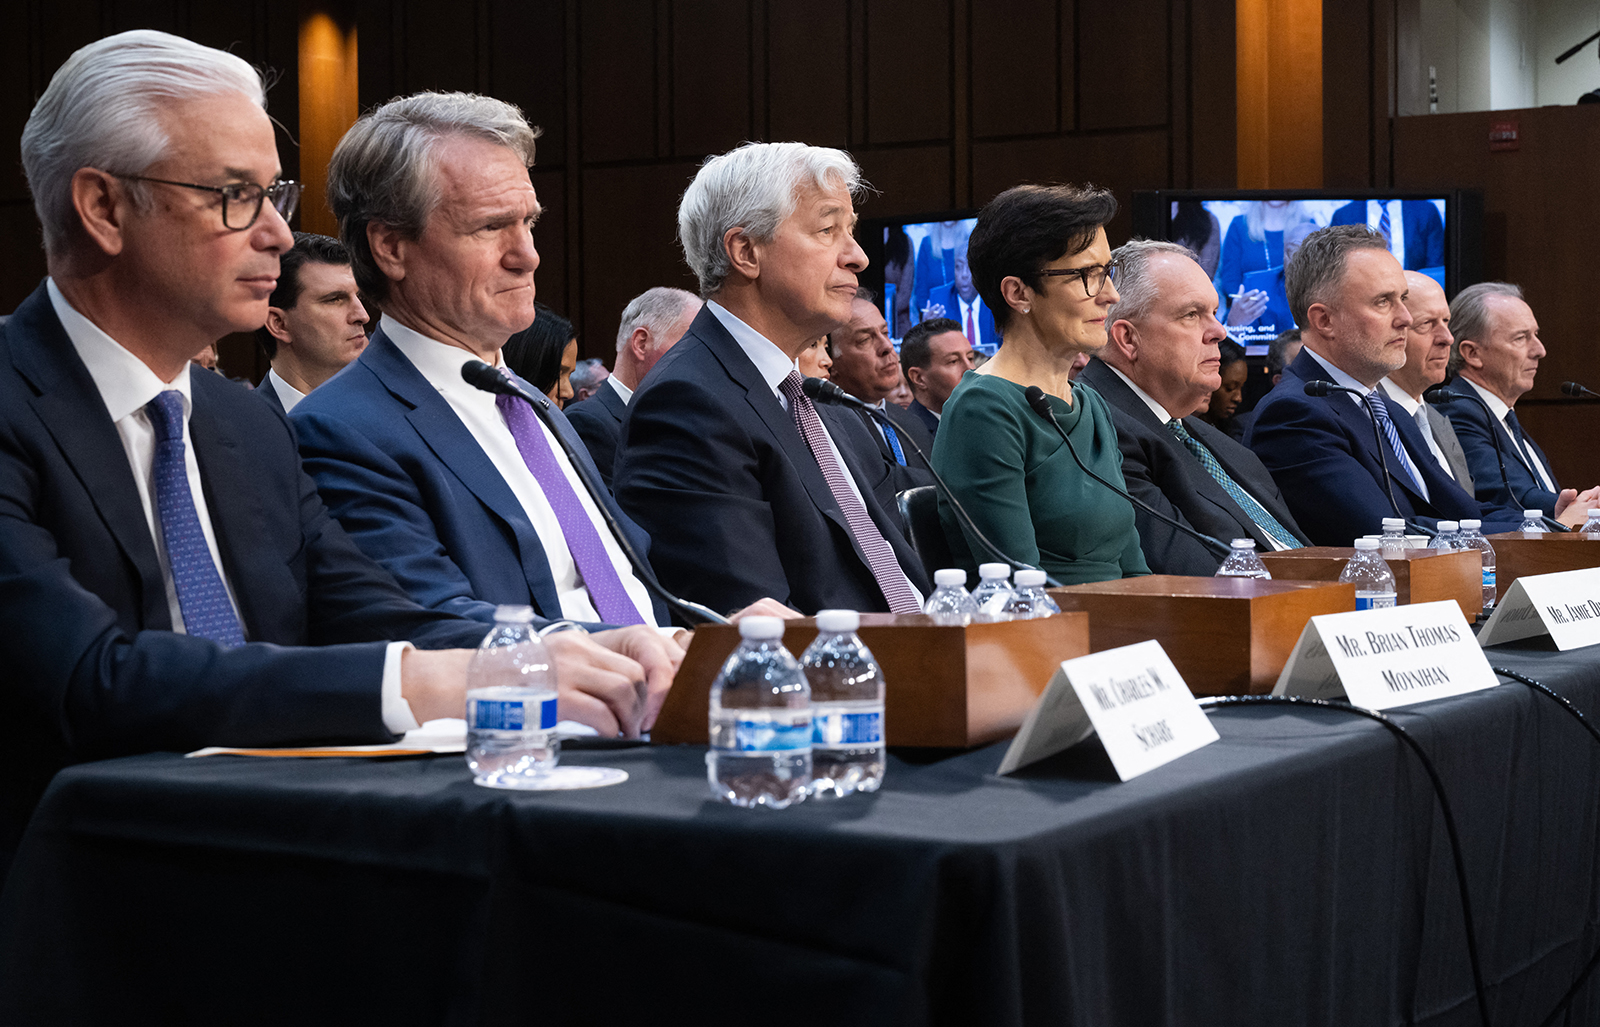 (L-R) Wells Fargo CEO and President Charles Scharf, Brian Bank of America Chairman and CEO Thomas Moynihan, JPMorgan Chase Chairman and CEO Jamie Dimon, Citigroup CEO Jane Fraser, State Street CEO Ronald OÕHanley, BNY Mellon CEO Robin Vince, Goldman Sachs CEO David Solomon and Morgan Stanley CEO James Gorman, testify during a Wall Street oversight hearing by the Senate Banking, Housing, and Urban Affairs committee on Capitol Hill in Washington, DC, today.